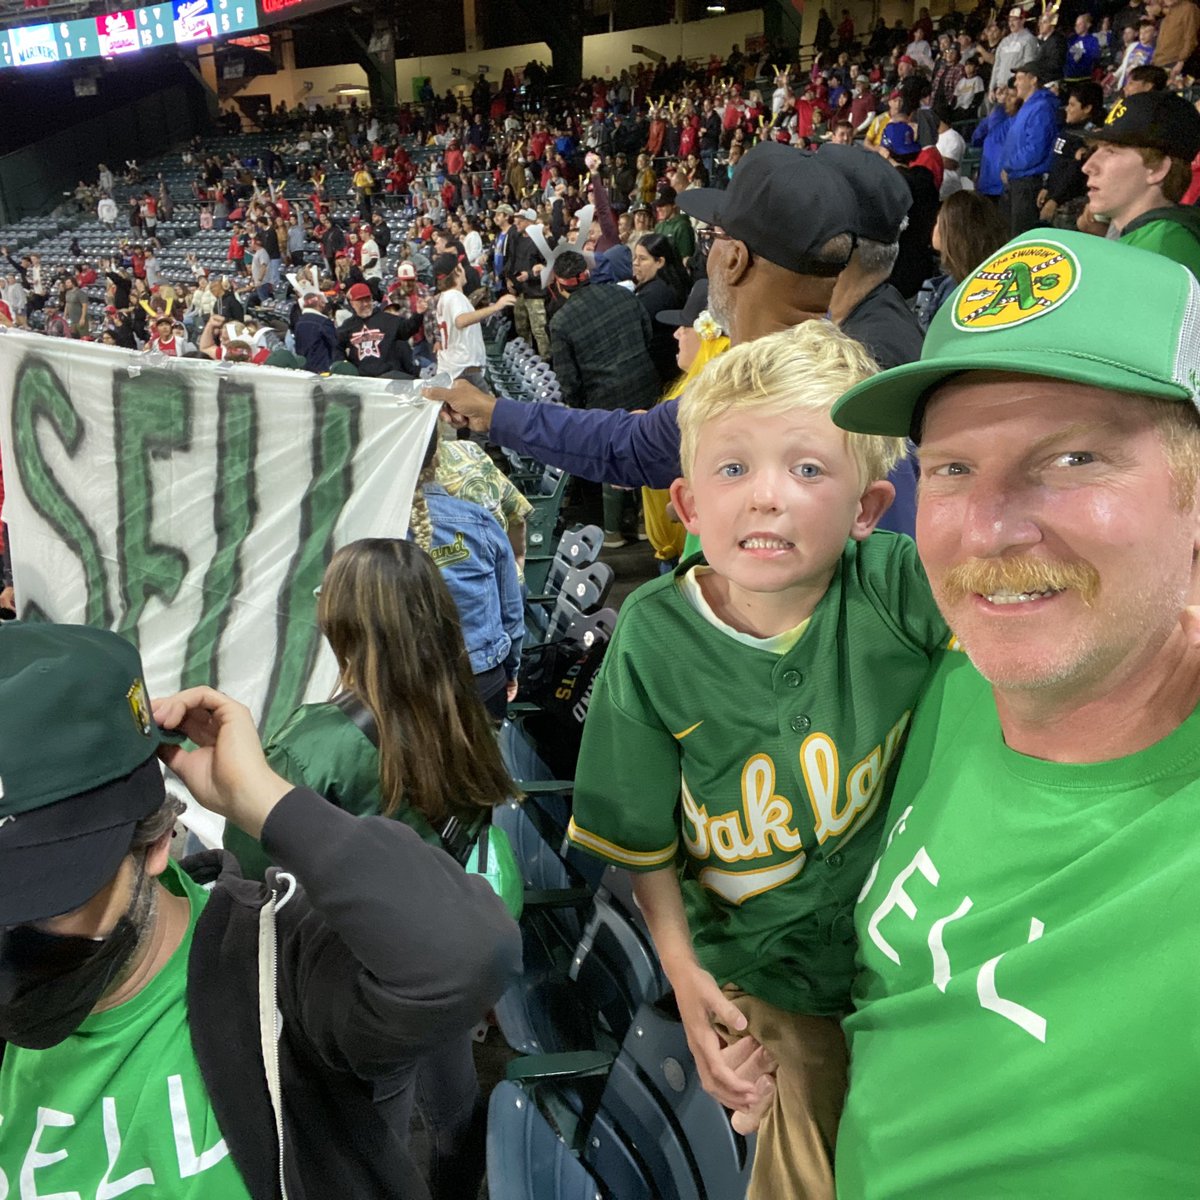 @MLB Never forgot the @mlb and @Athletics are ripping this team from its loyal fan base! #SELL #SELLtheTeam #FisherOut